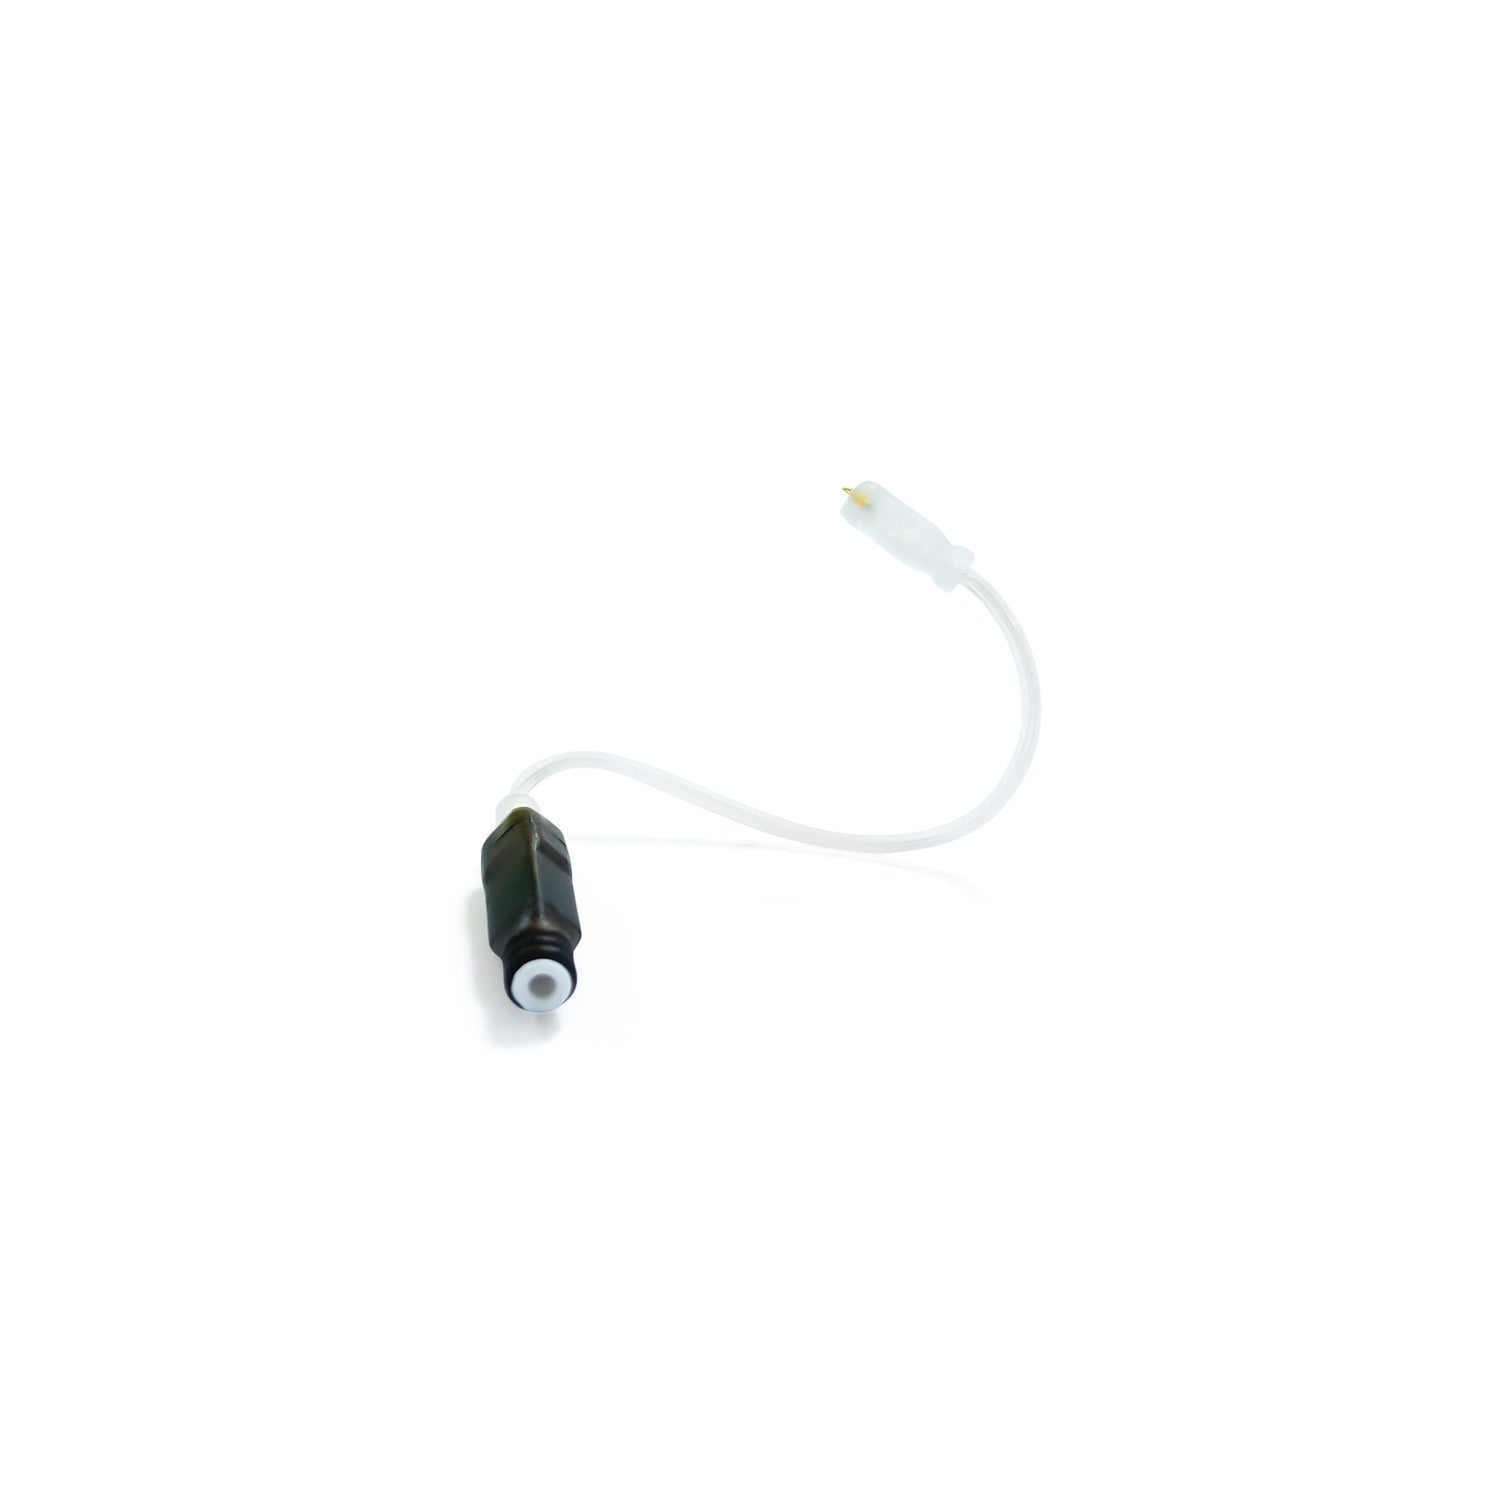 Sound Tube with Receiver of V03B RIC Hearing Aids